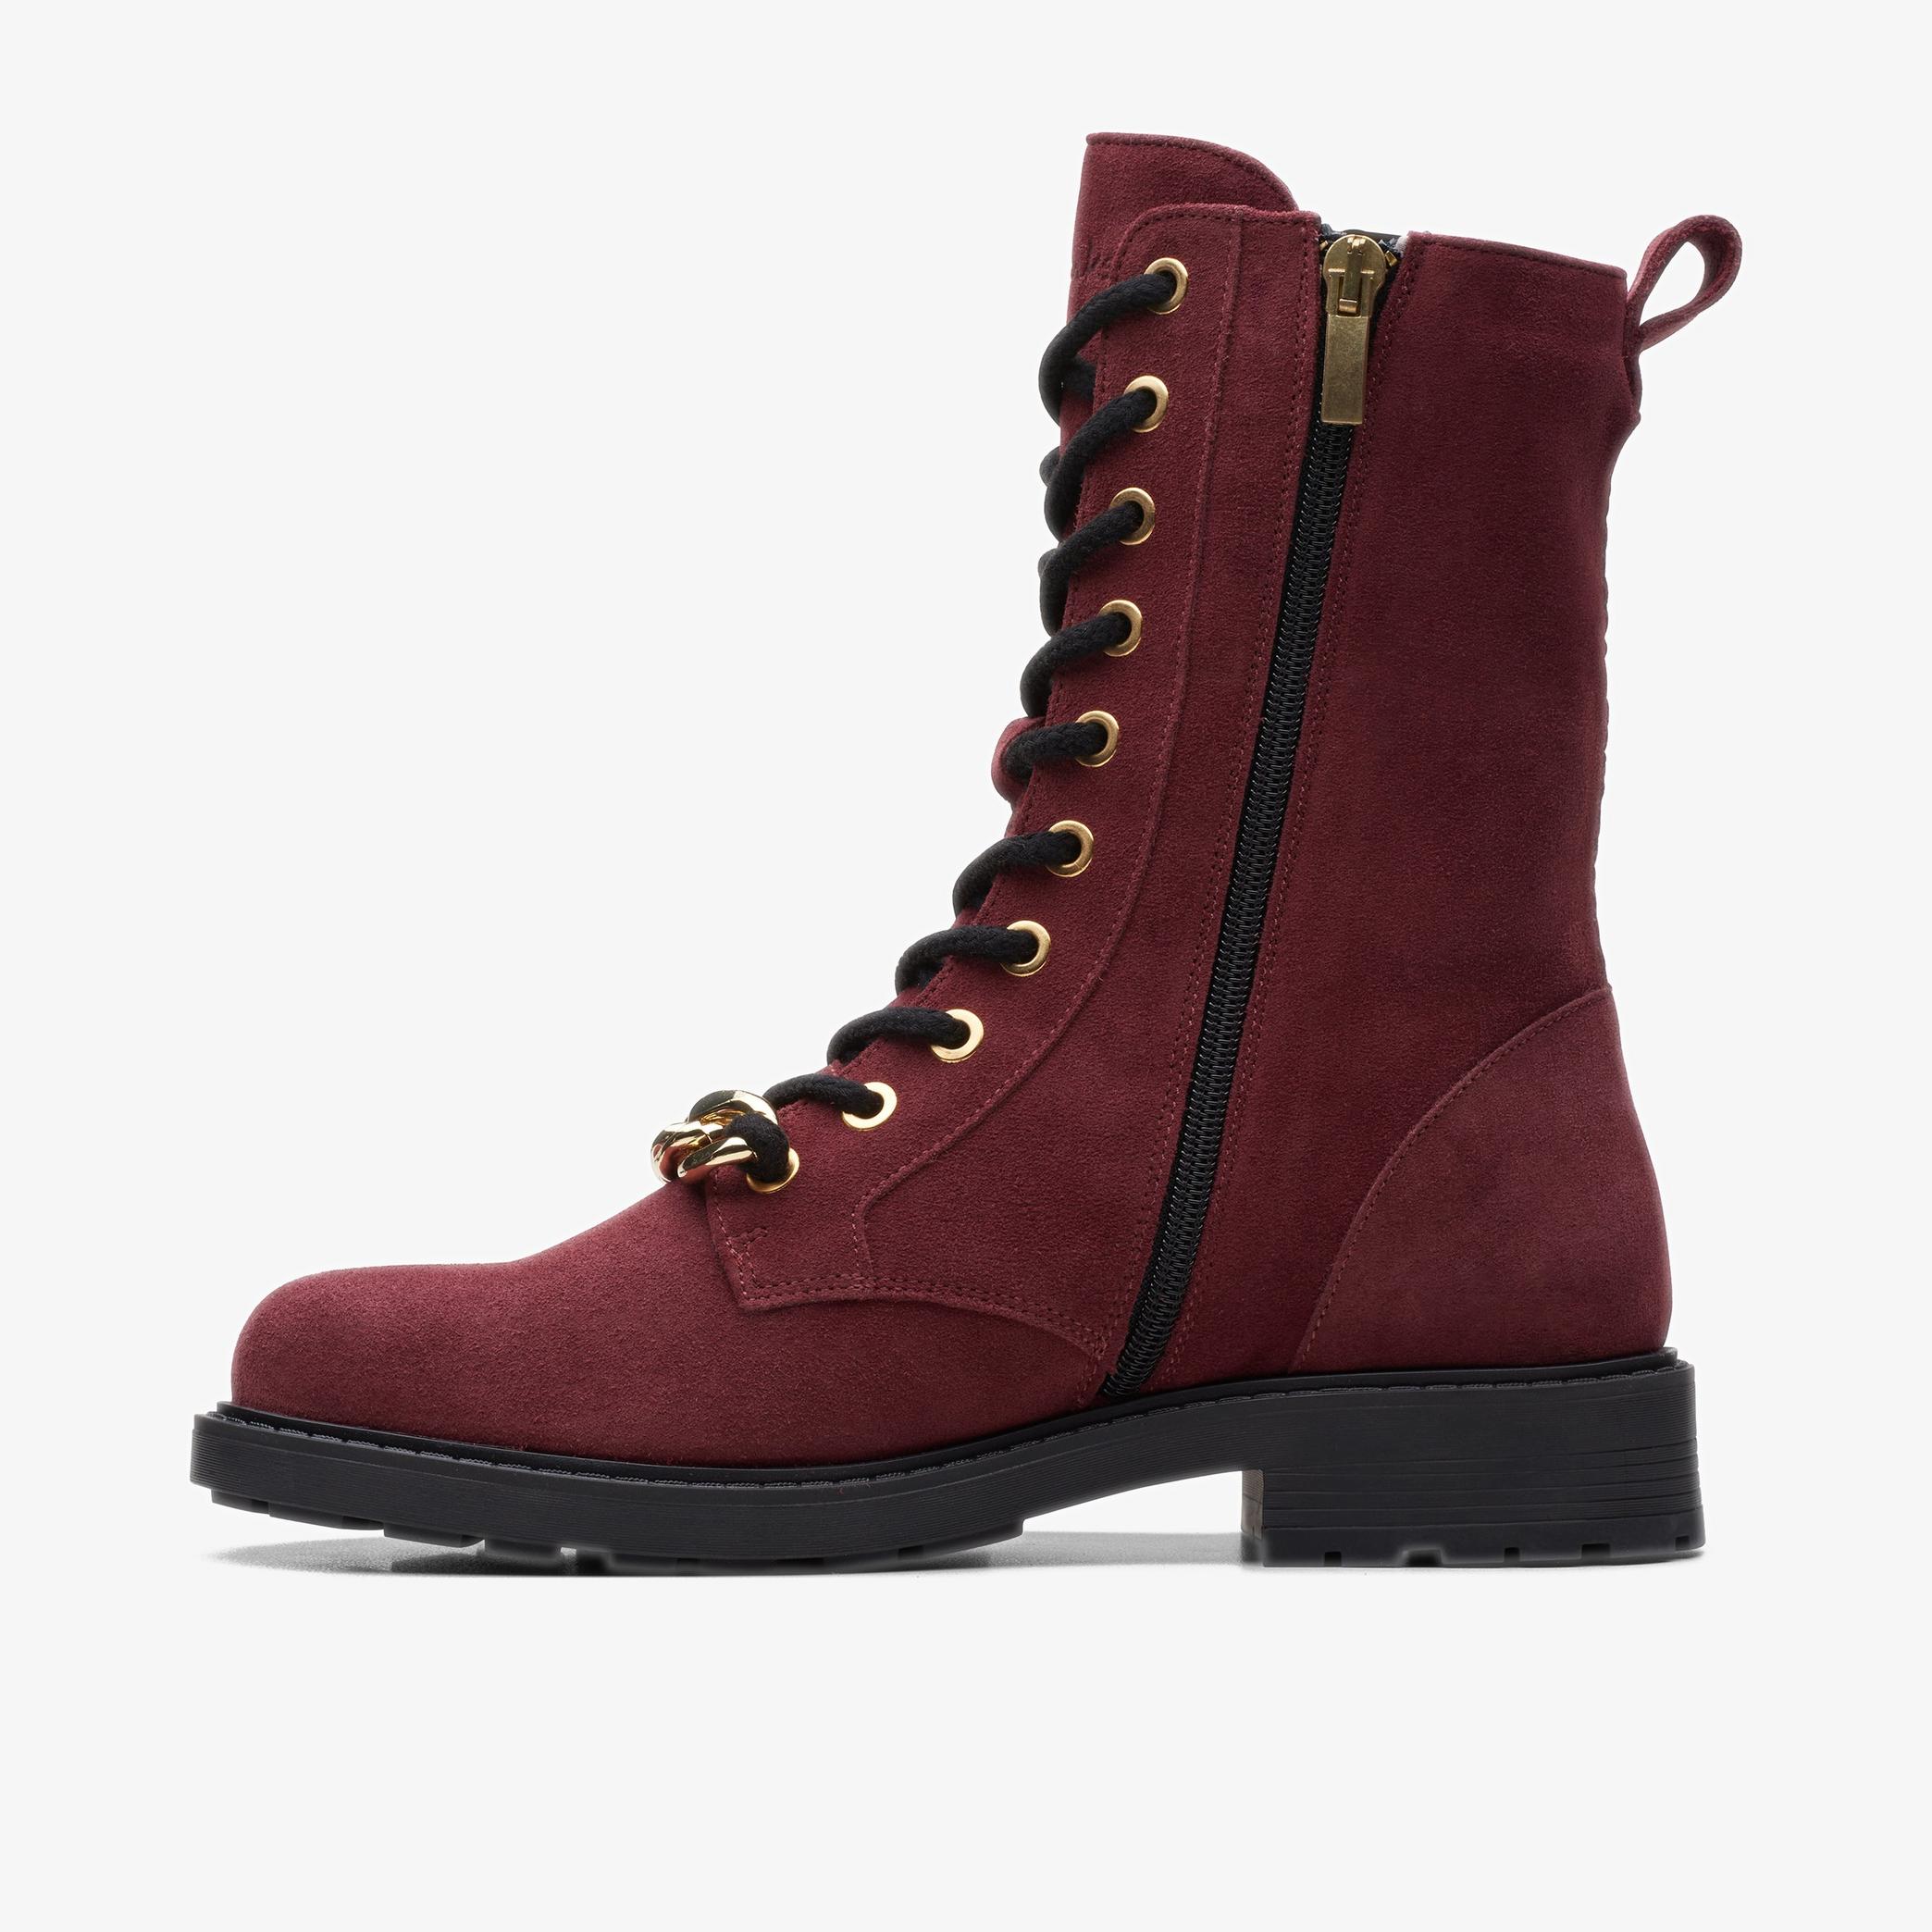 Orinoco2 Style Merlot Suede Ankle Boots, view 2 of 6